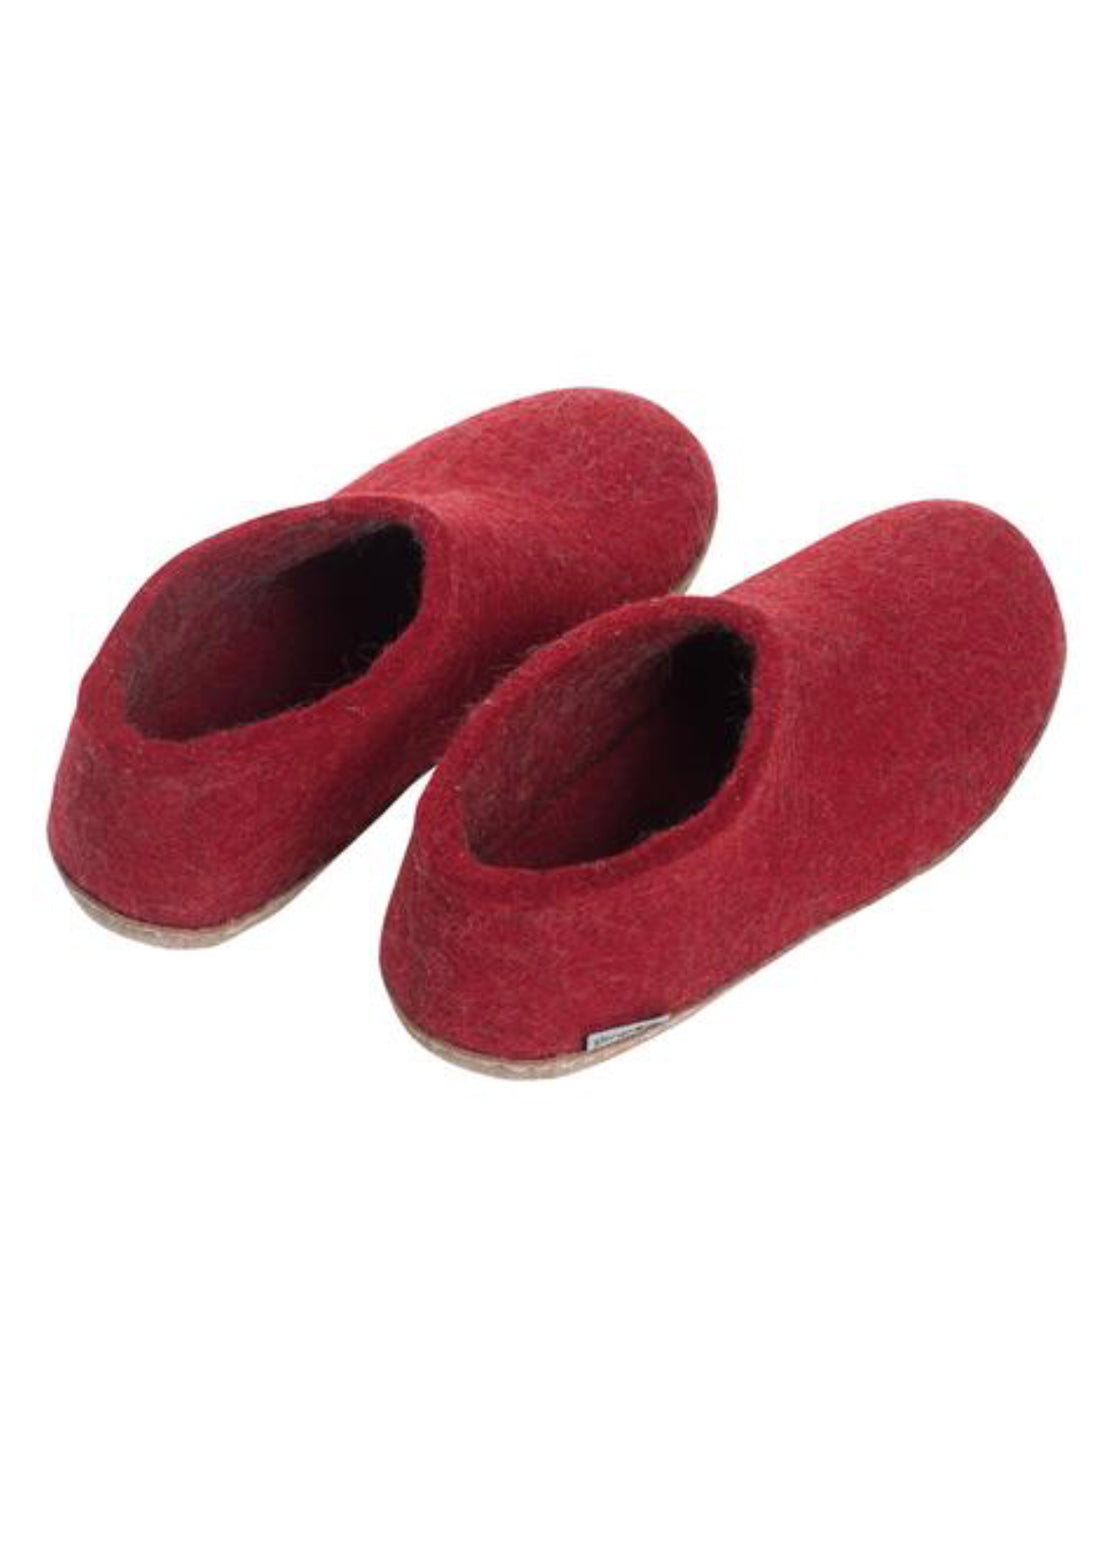 Glerups Unisex Leather Sole Slipper Shoes Red